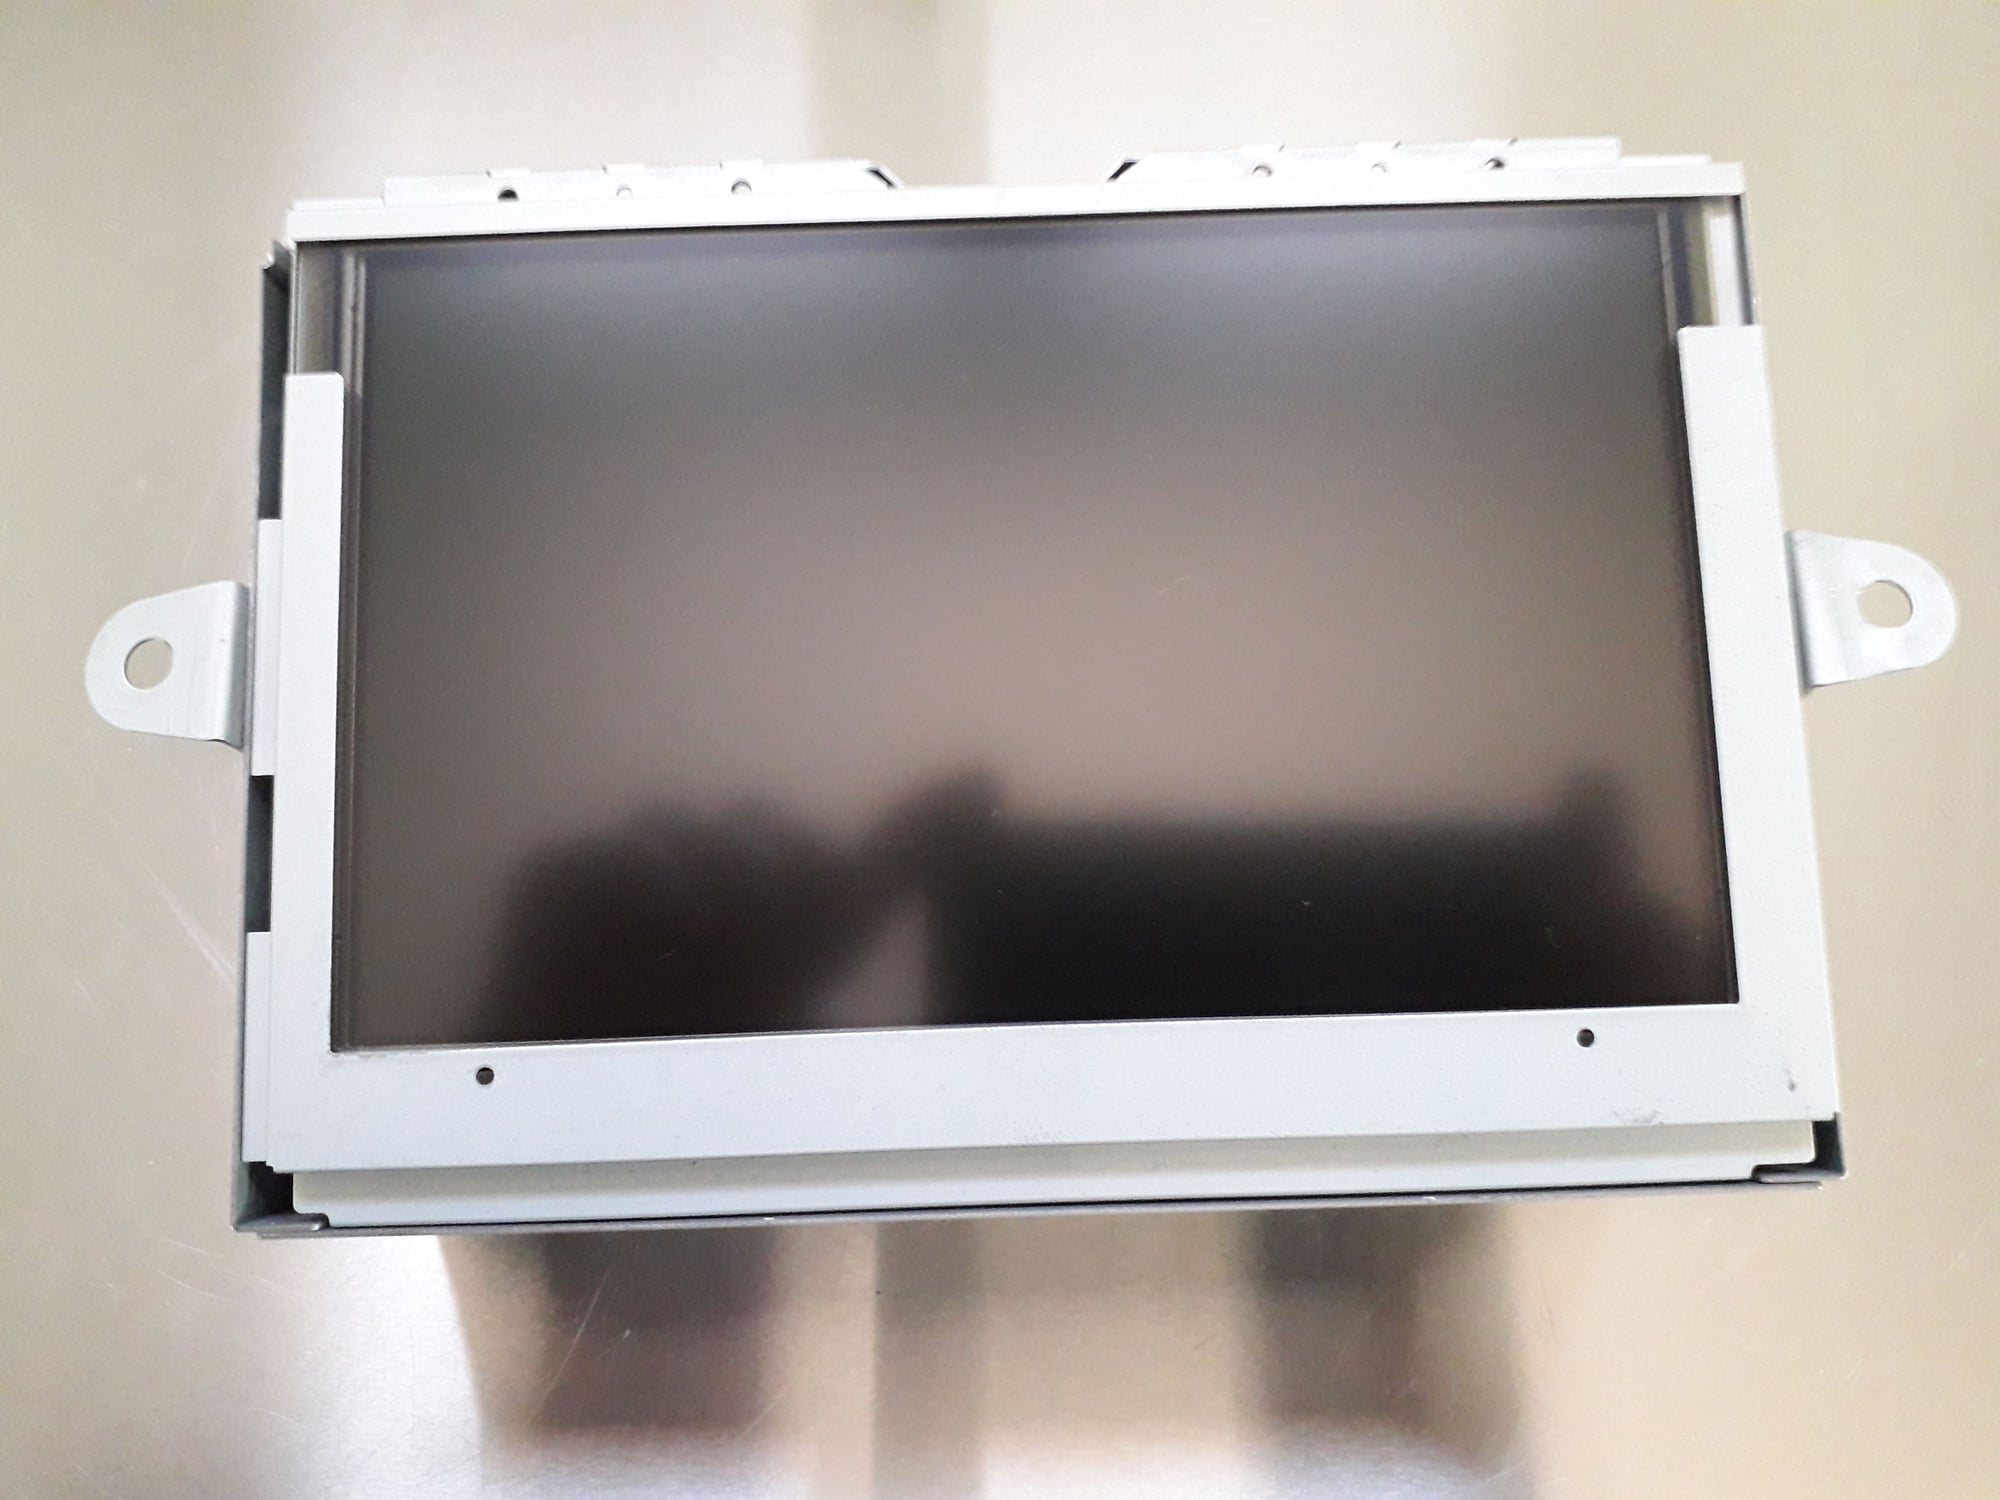 Miscellaneous - Center console display - Used - 2006 to 2009 Jaguar XK150 - Barcelona, Spain